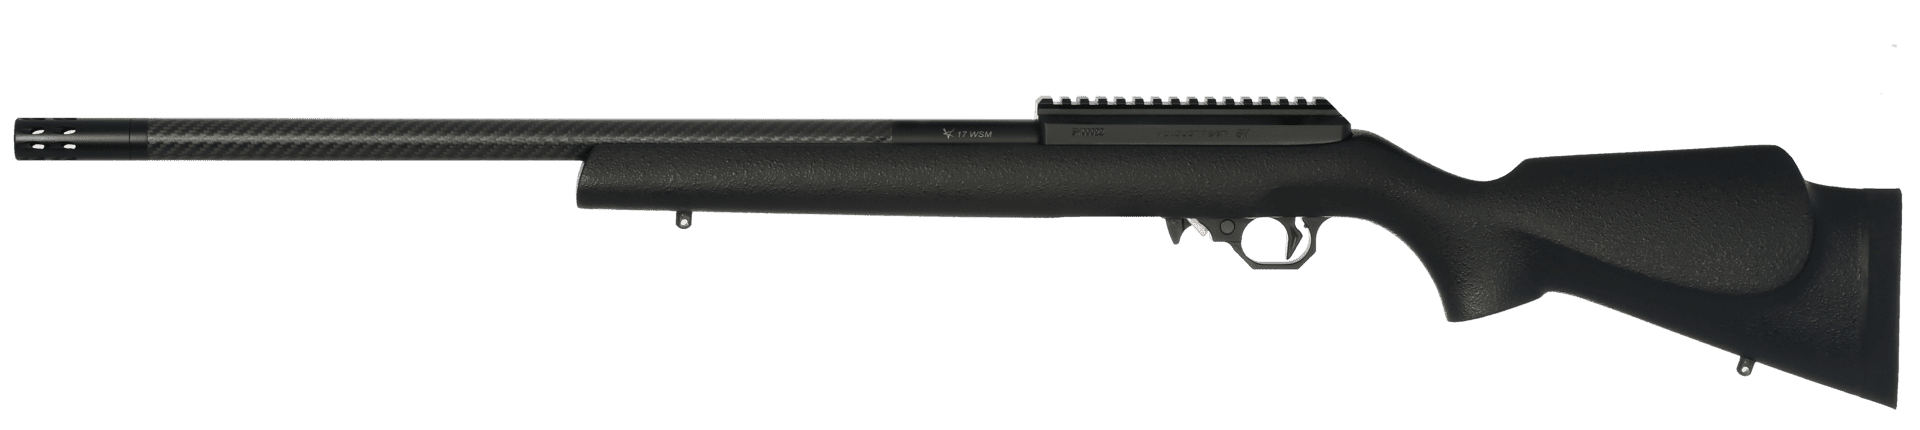 A lightweight black rifle with mcmillan stock